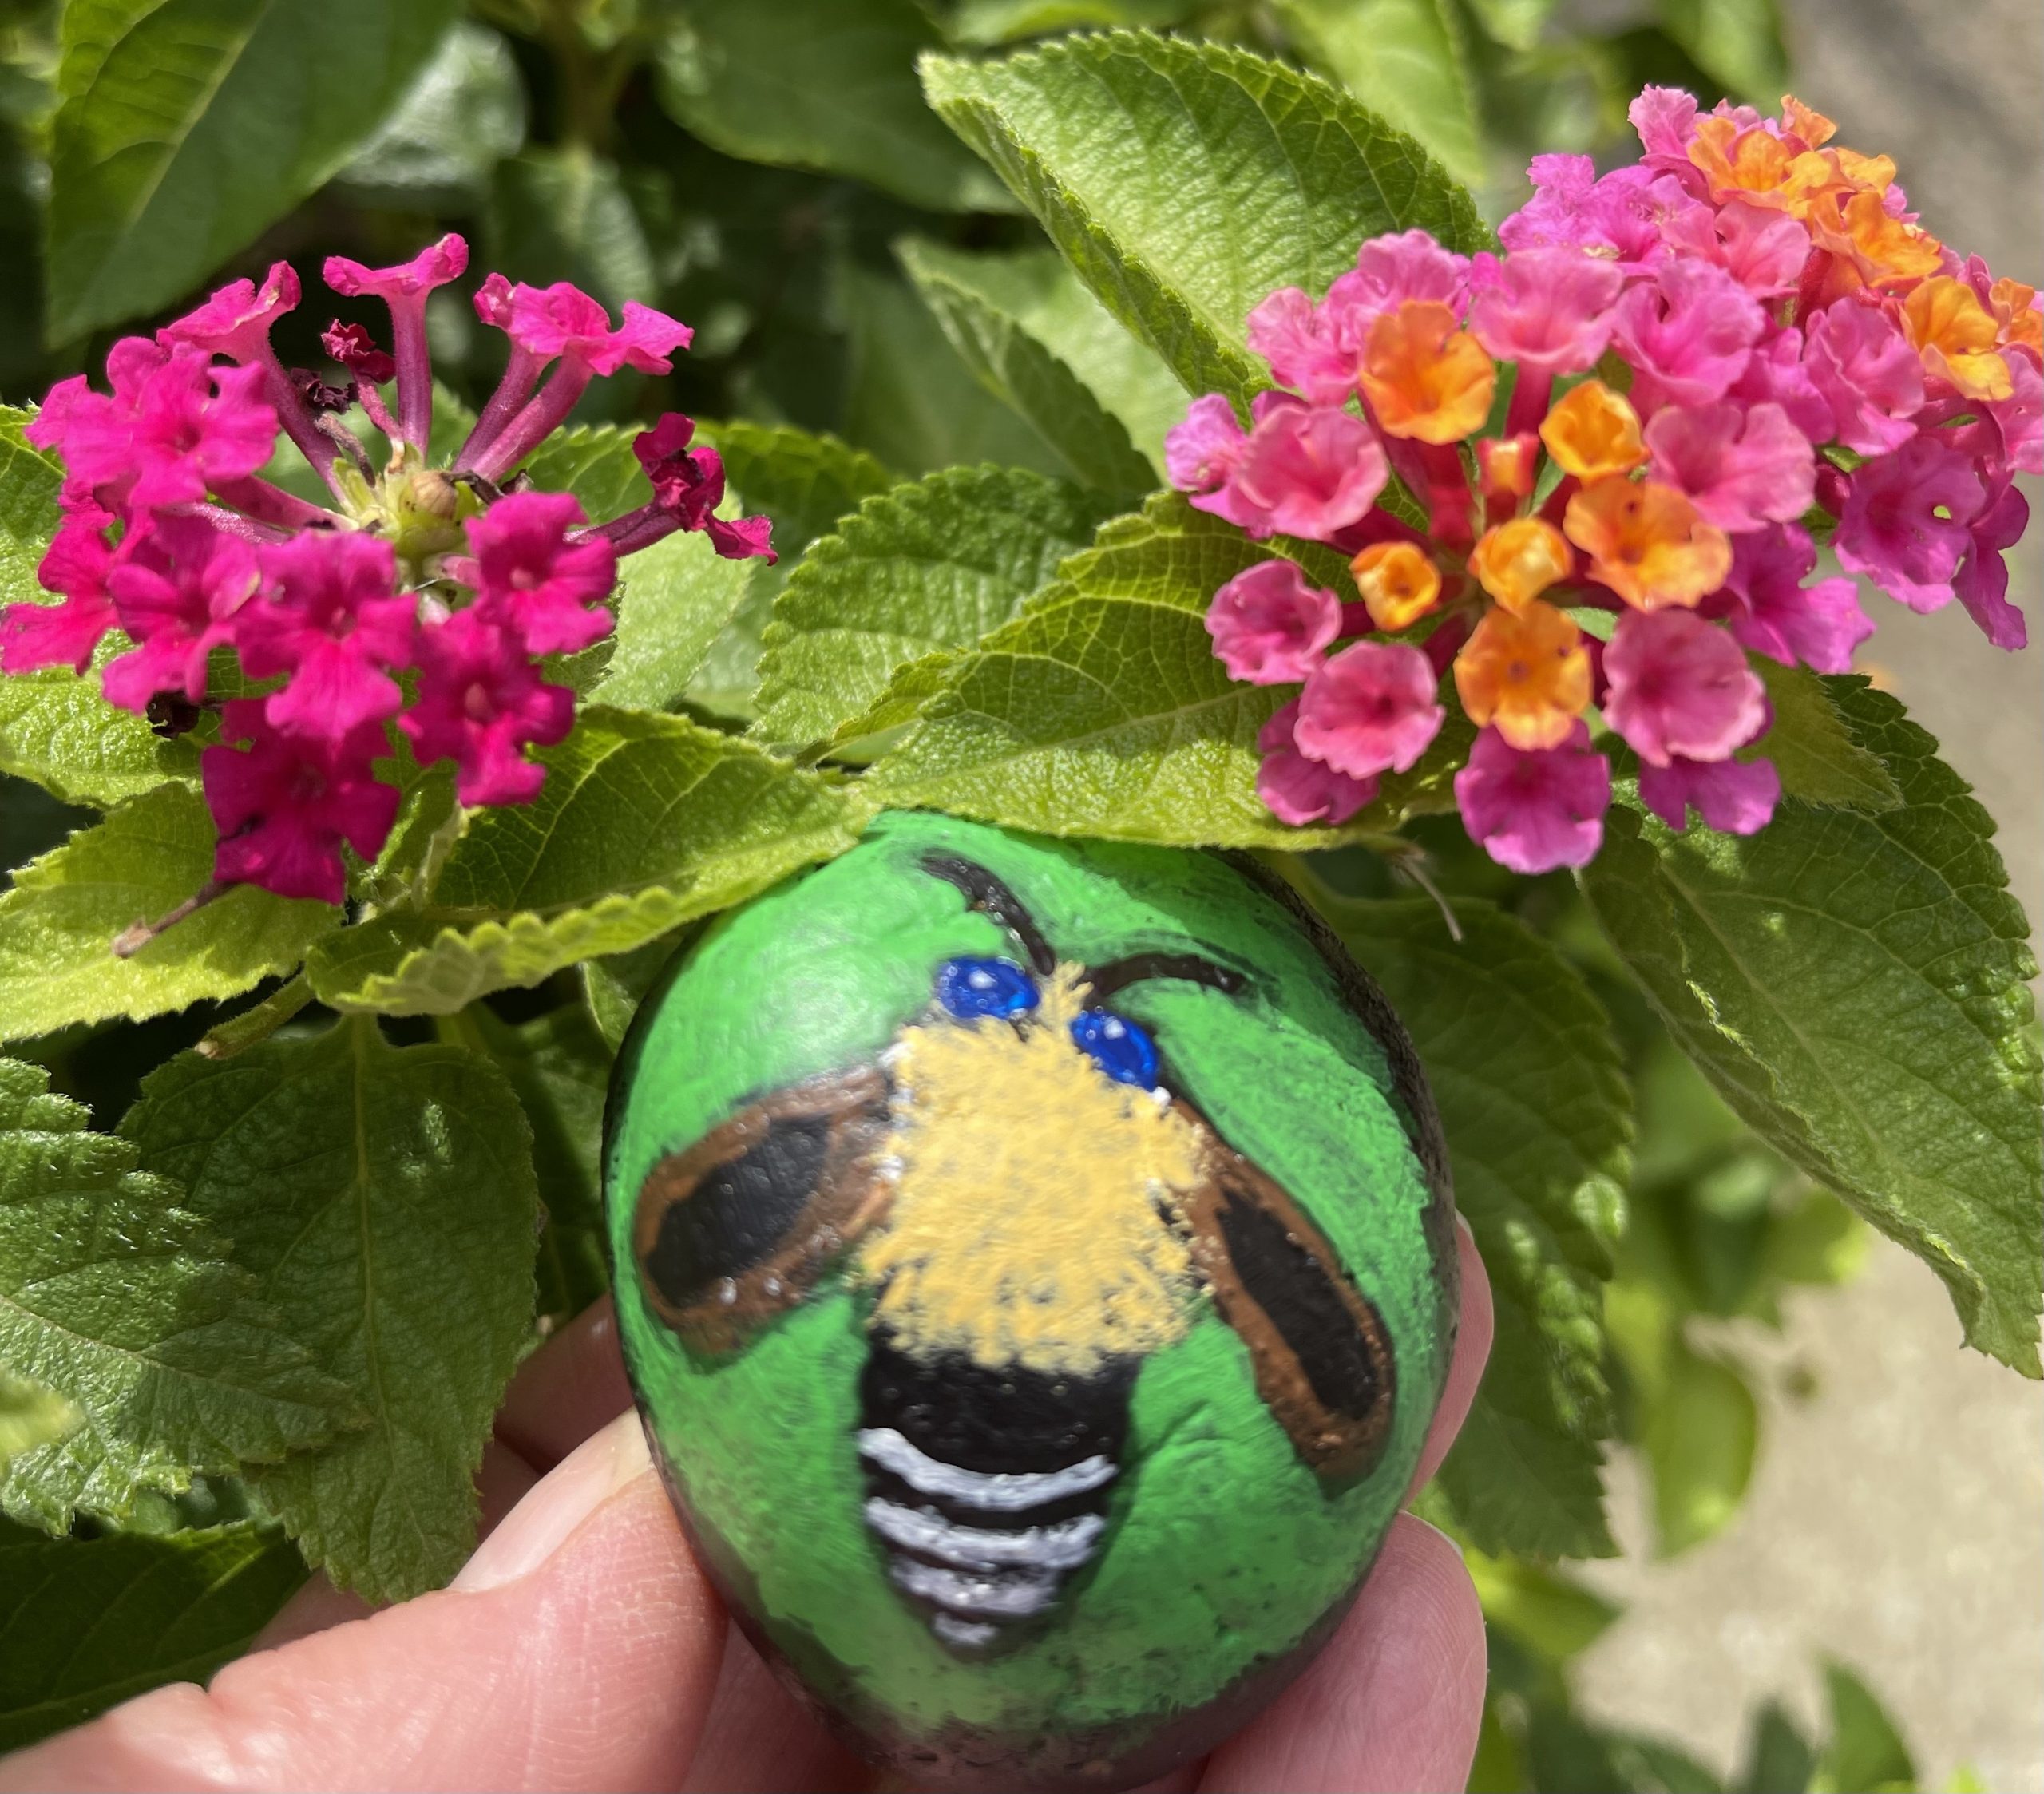 A Plasterer Bee painted on a rock